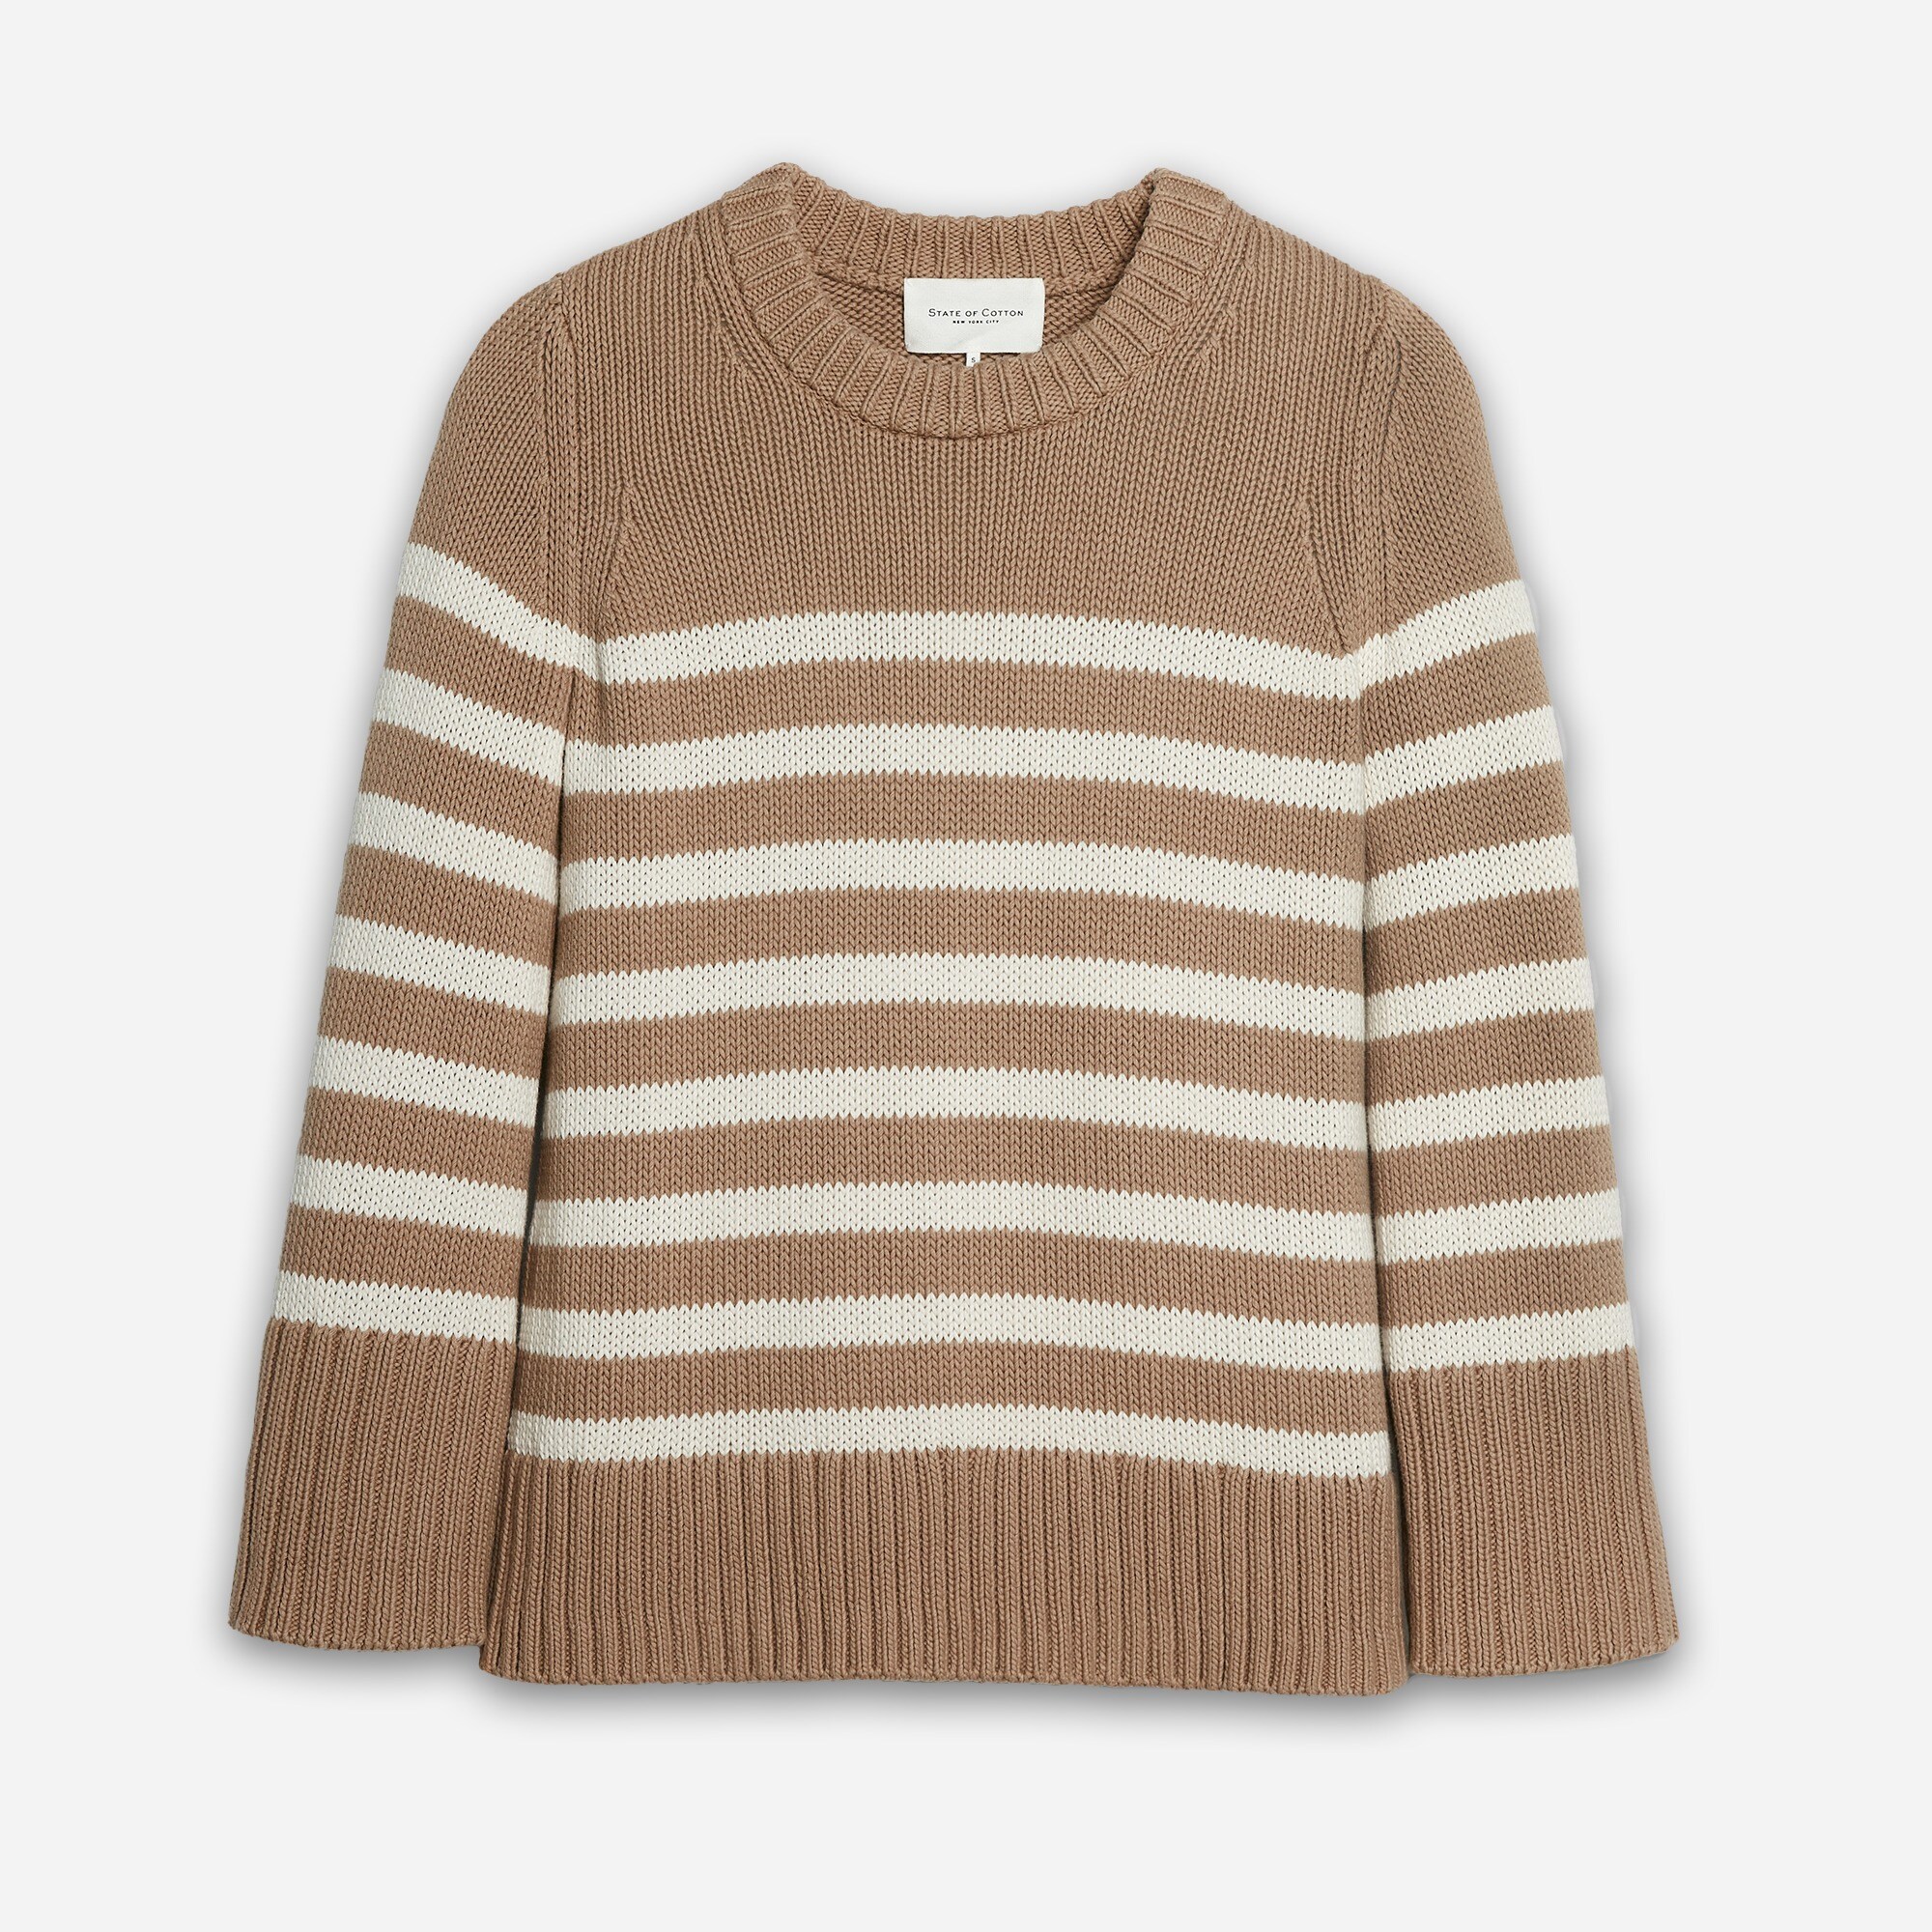  State of Cotton NYC Kittery striped sweater